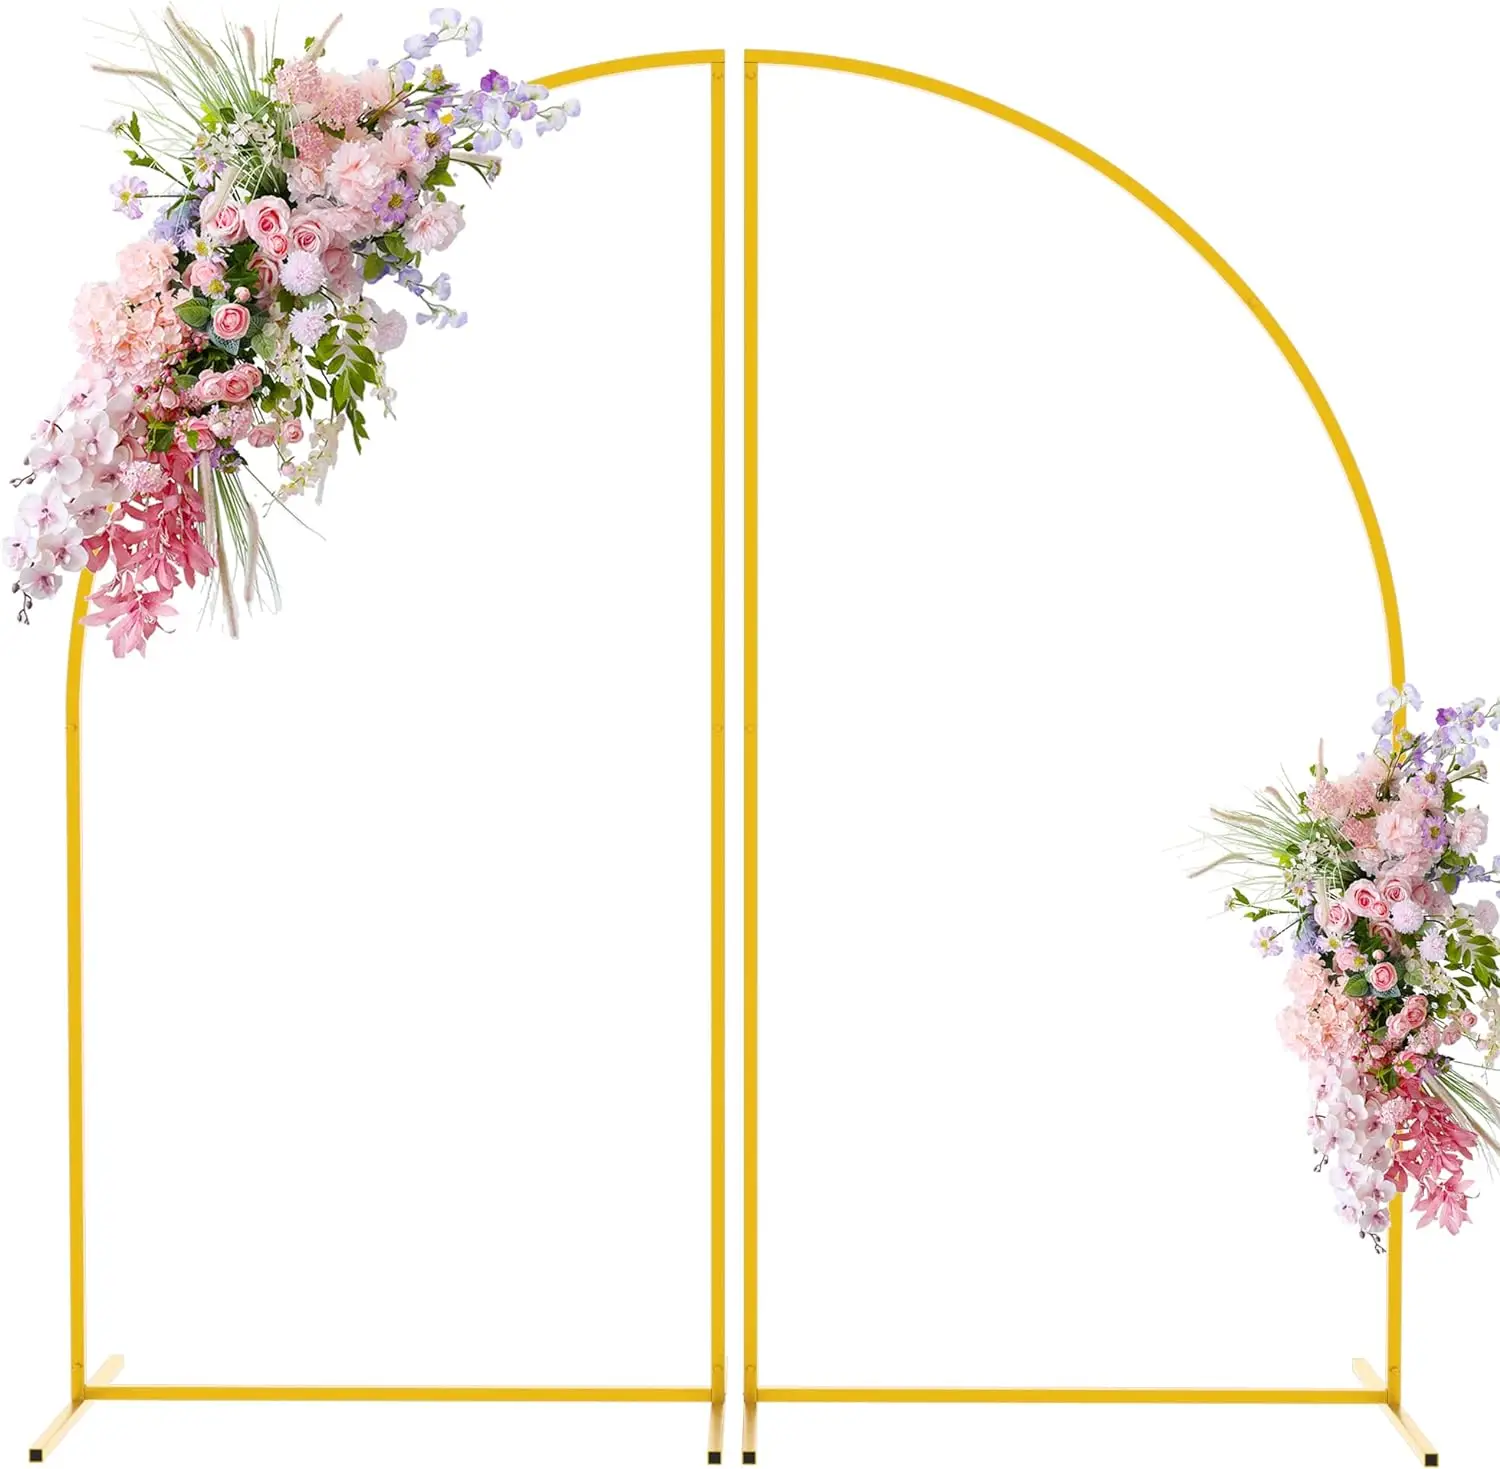 

Metal Arch Backdrop Stand 6FT Set of 2 Gold Wedding Arch Stand Backdrop Arched Frame for Wedding Ceremony Birthday Party Photo